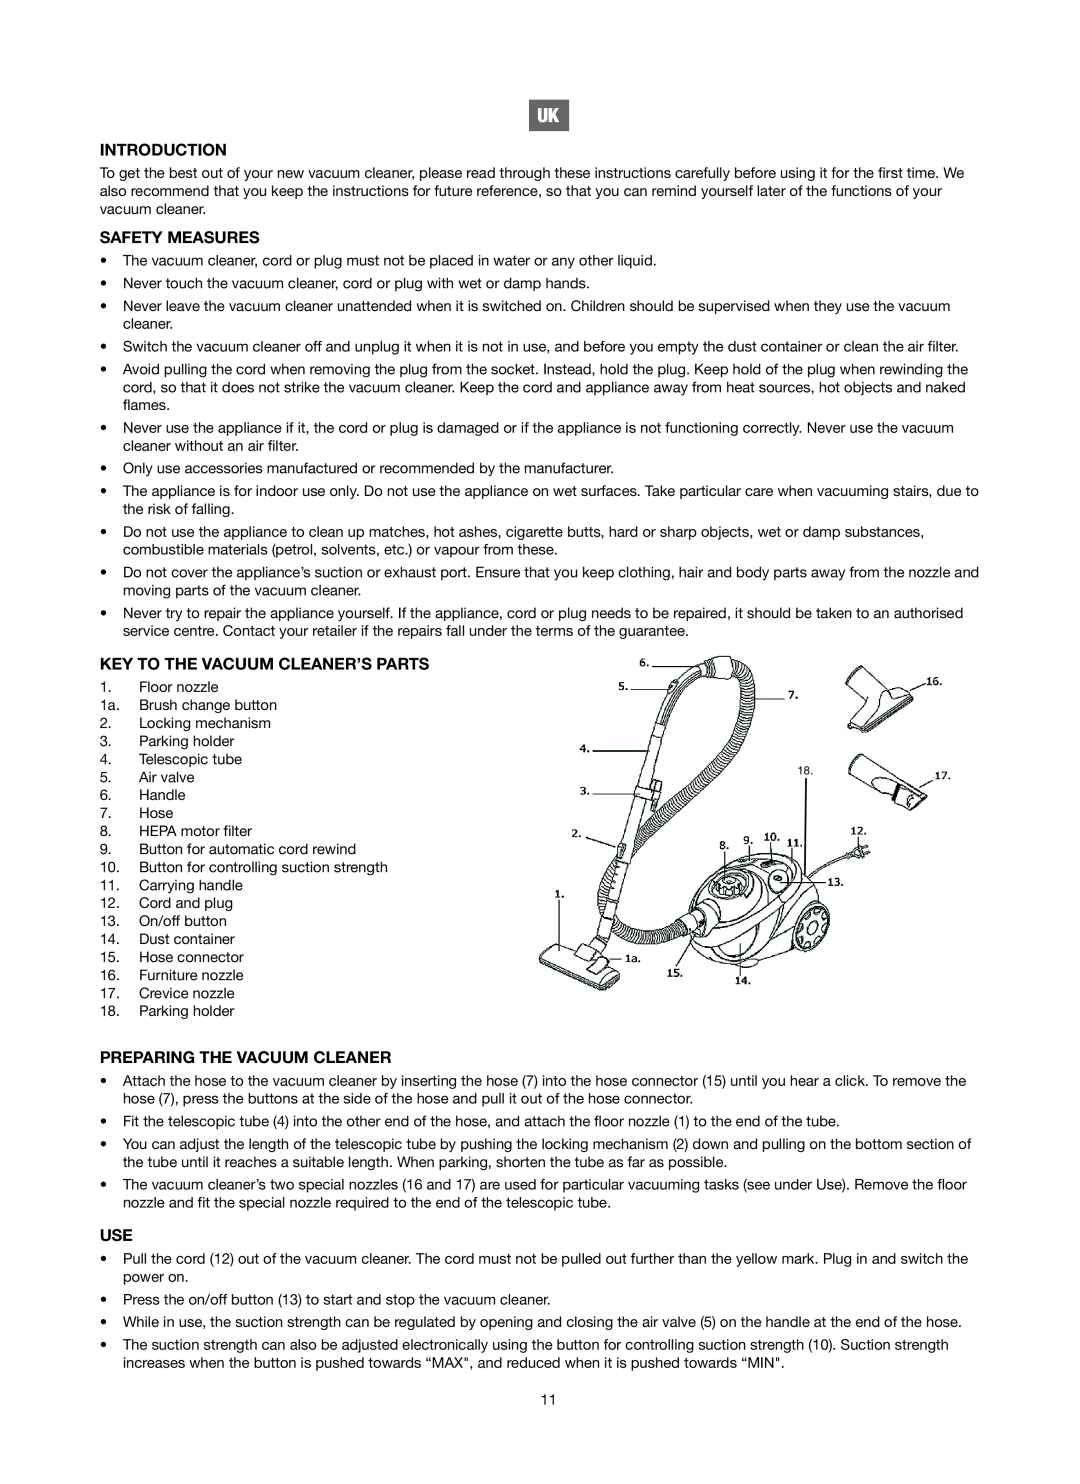 Melissa 740-106 manual Introduction, Safety Measures, Key To The Vacuum Cleaner’S Parts, Preparing The Vacuum Cleaner 